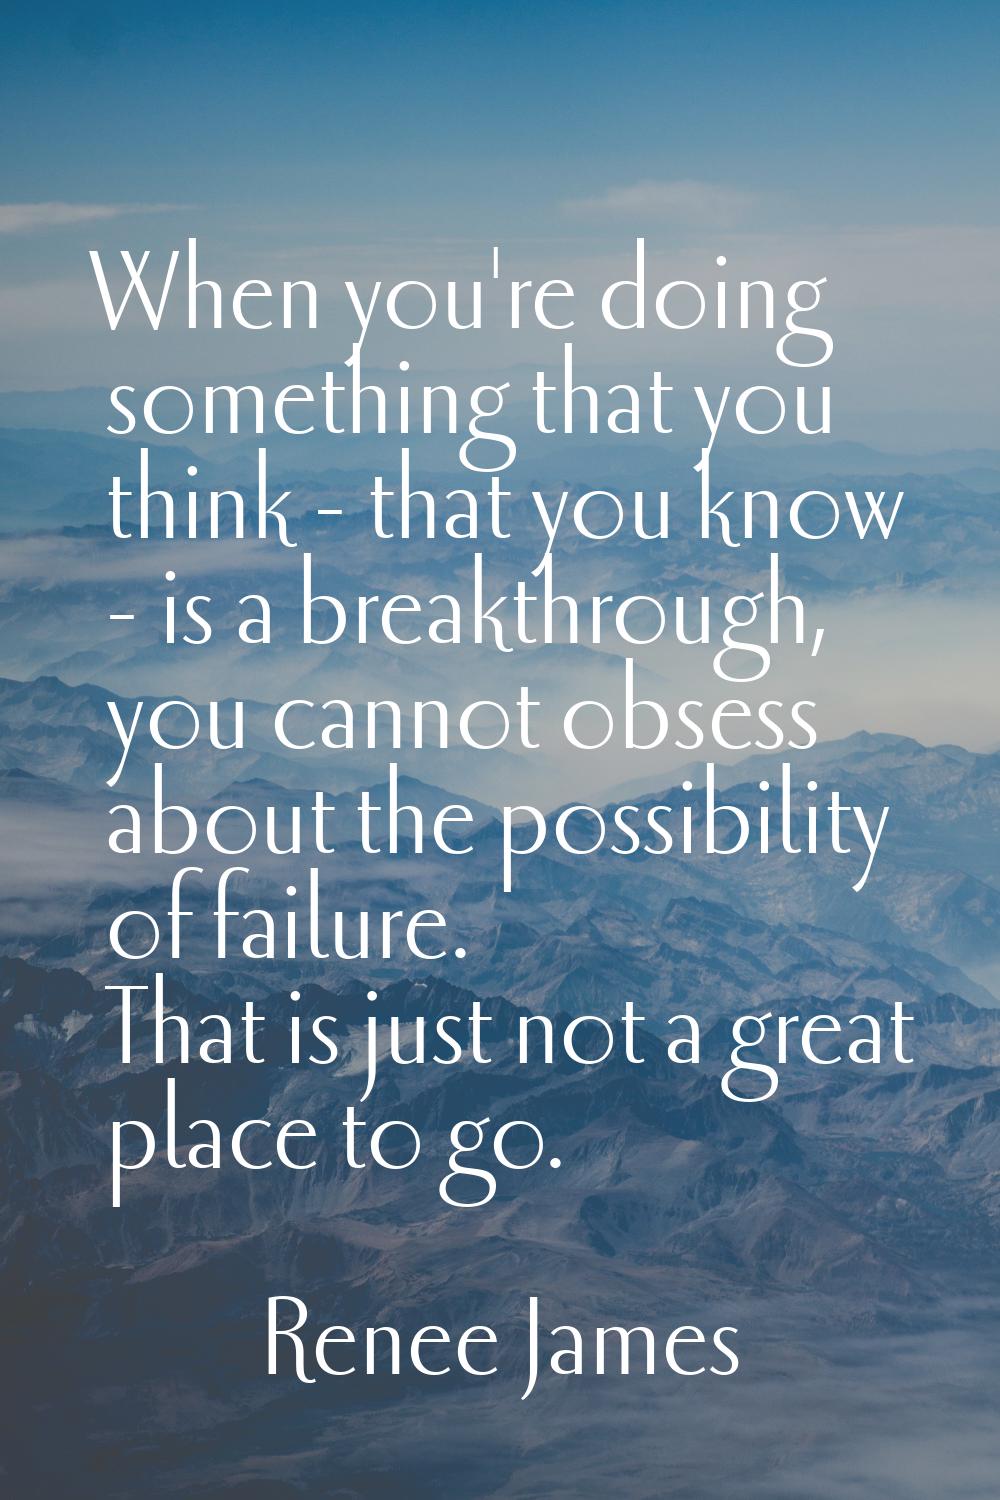 When you're doing something that you think - that you know - is a breakthrough, you cannot obsess a